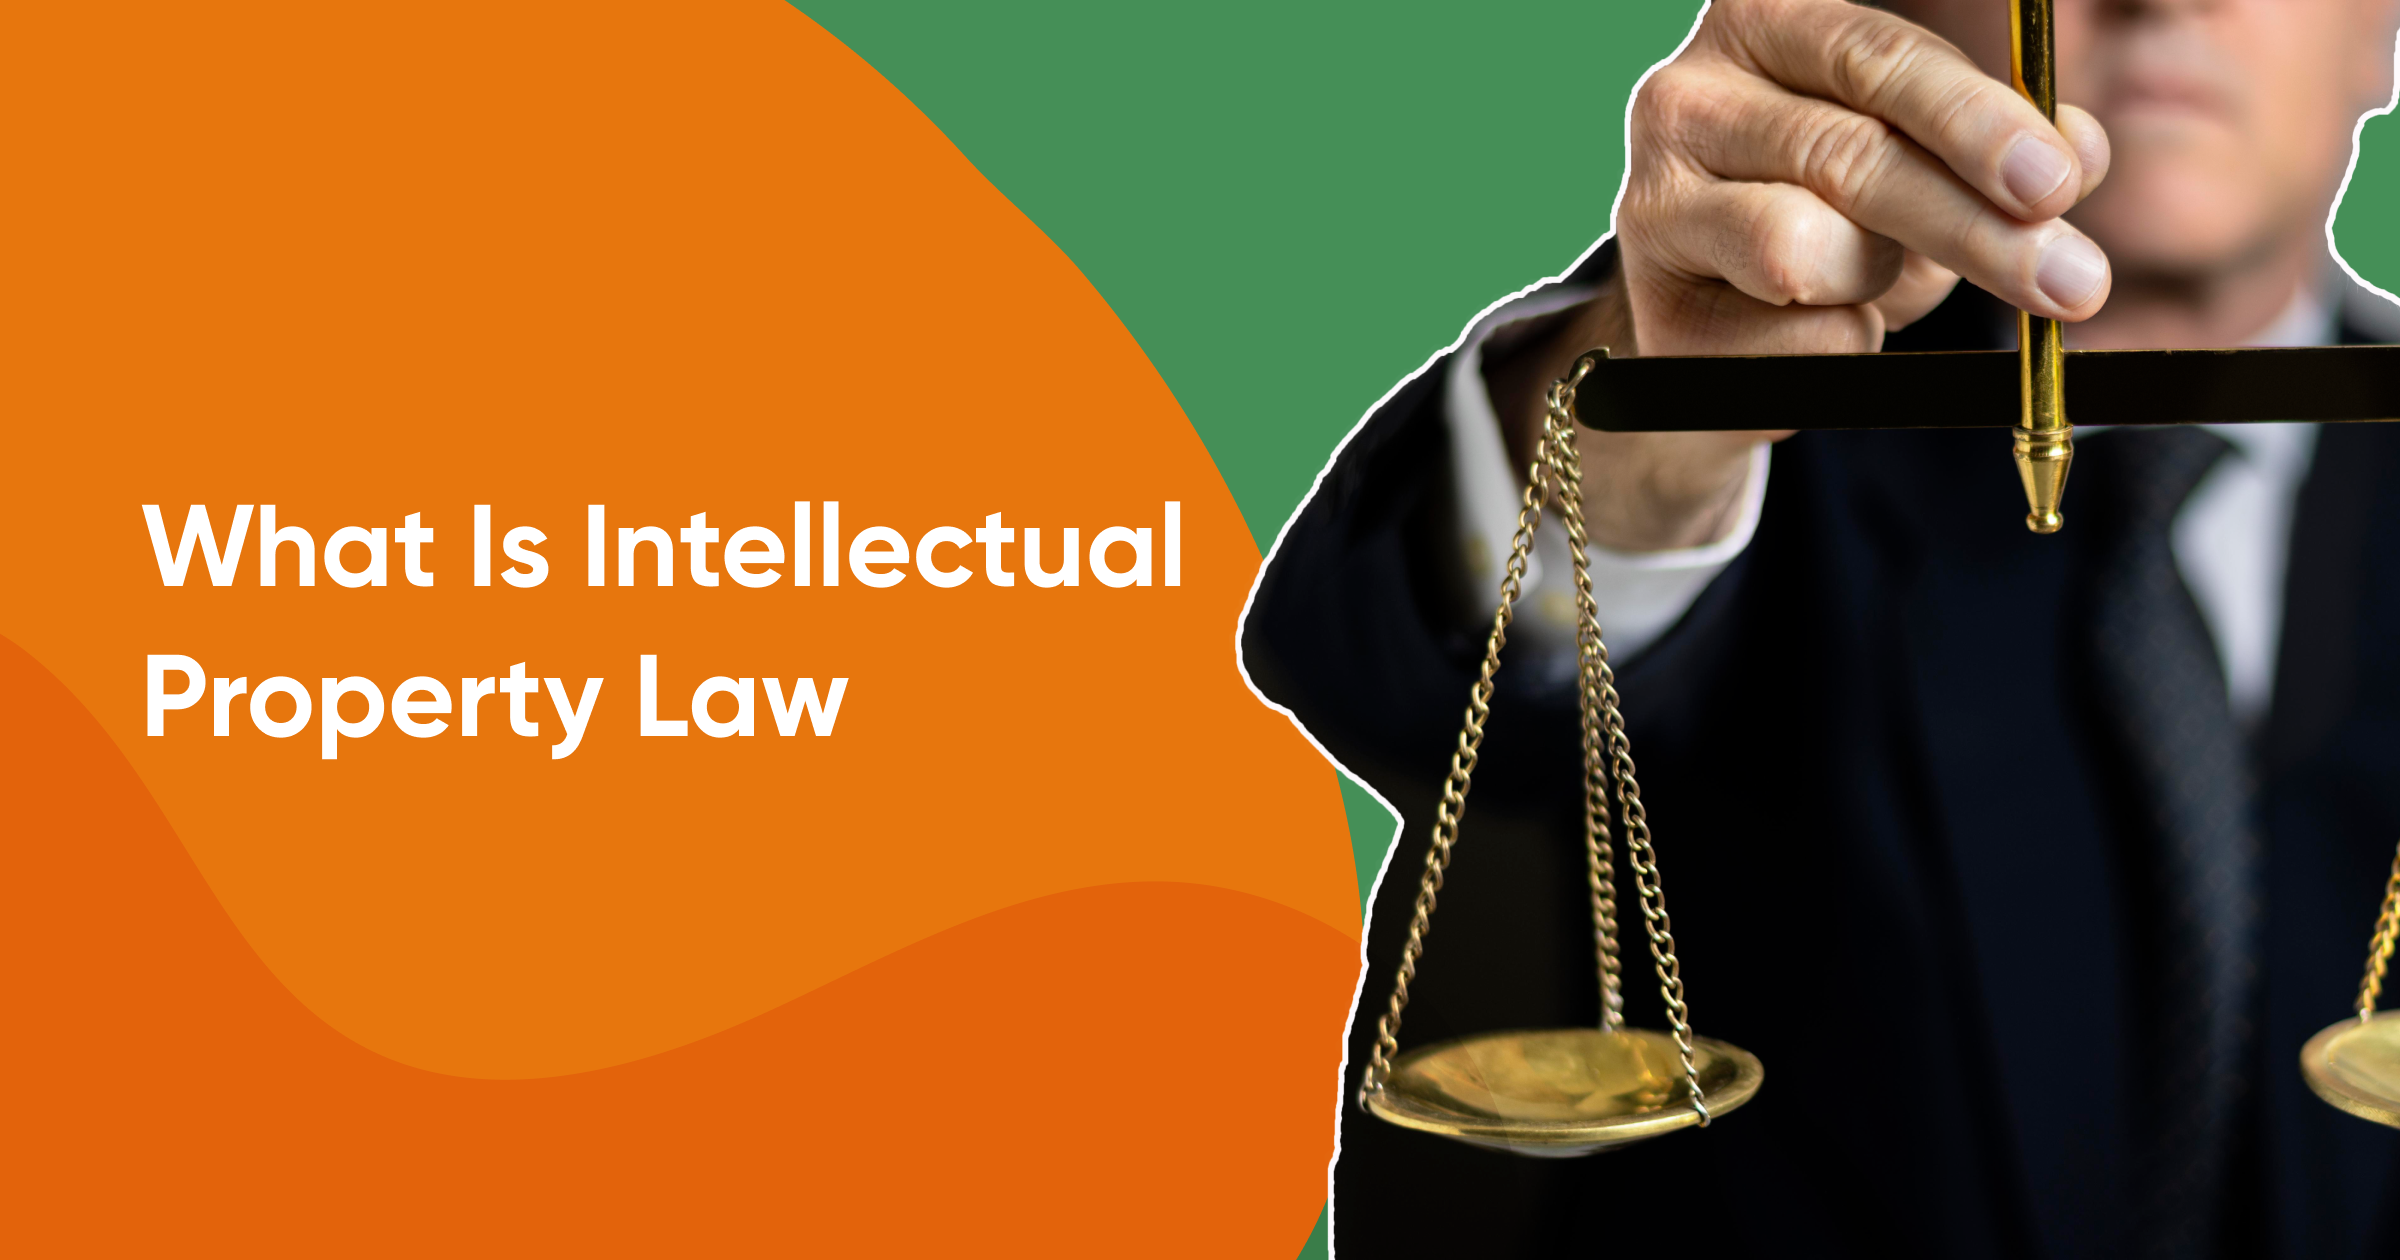 What is intellectual property law